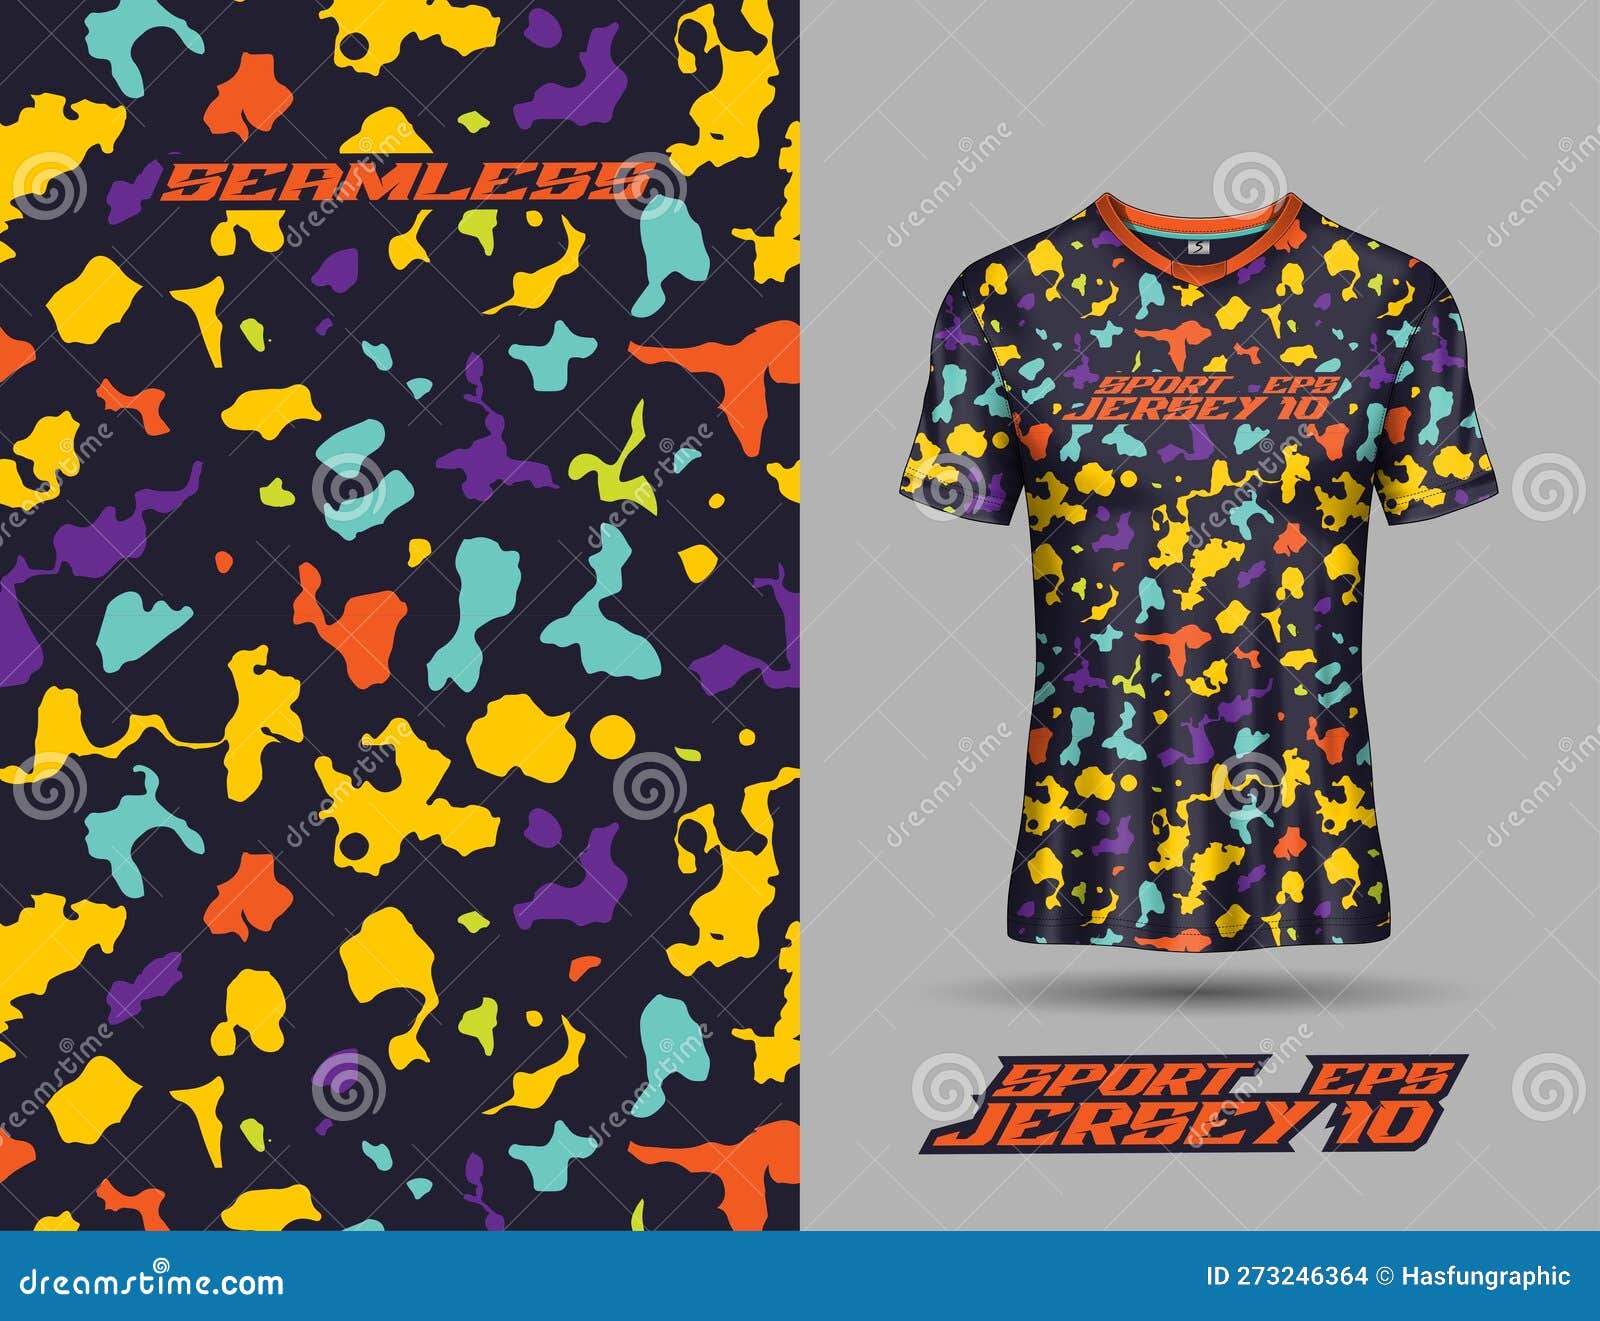 vector abstract design pattern for sports and sublimation printing